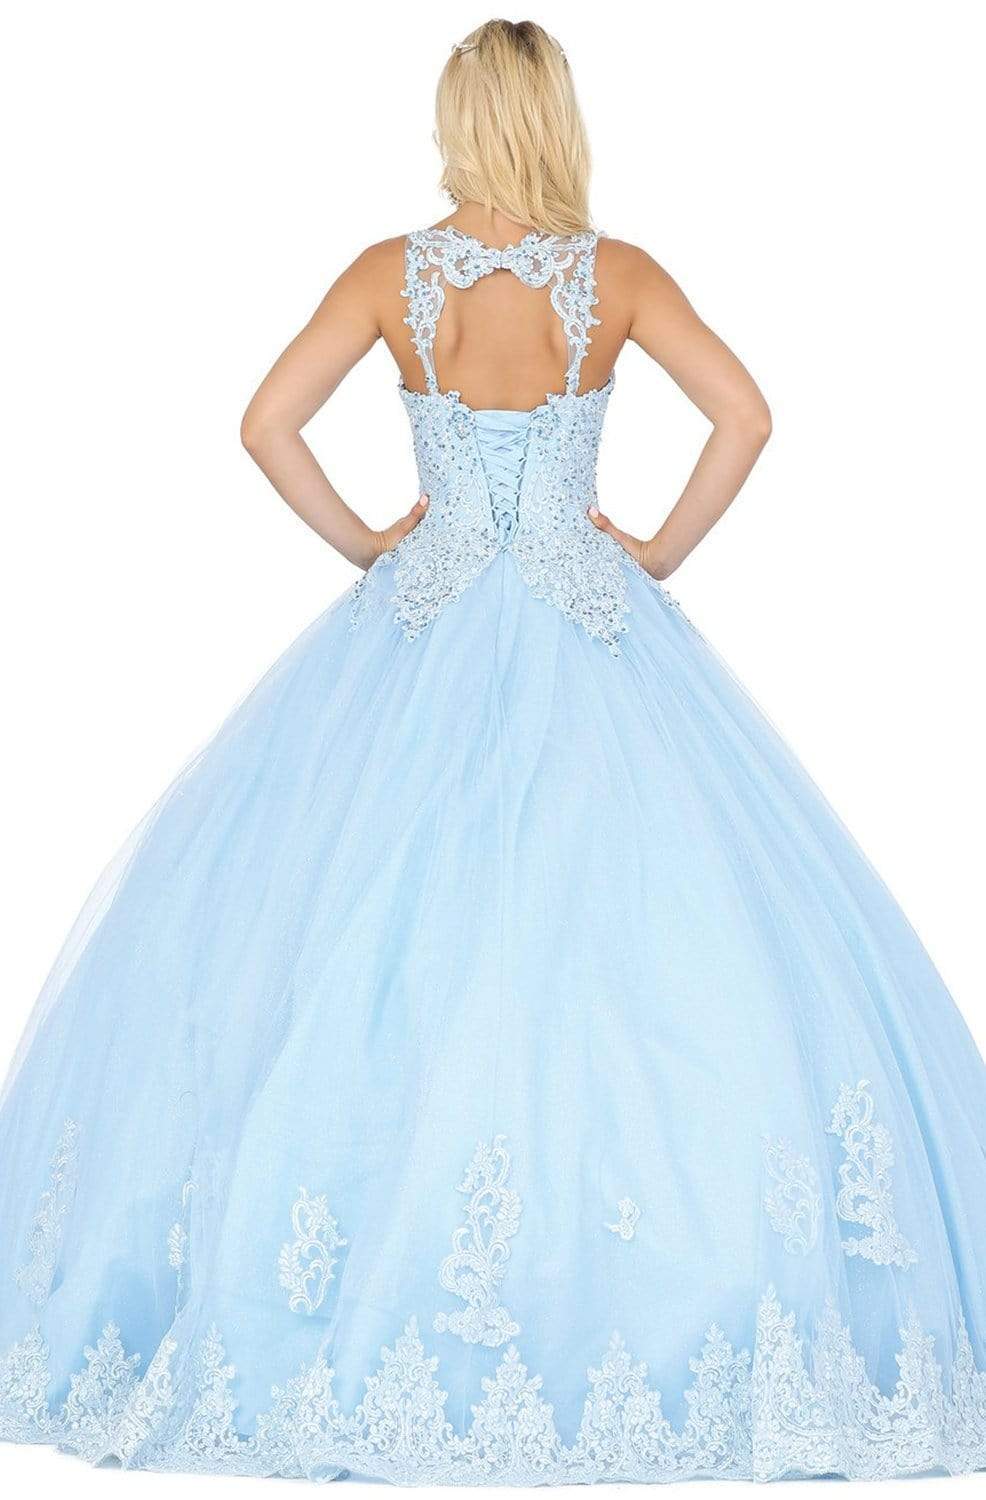 Dancing Queen - 1411 Embroidered Sweetheart Bodice Ballgown Quinceanera Dresses